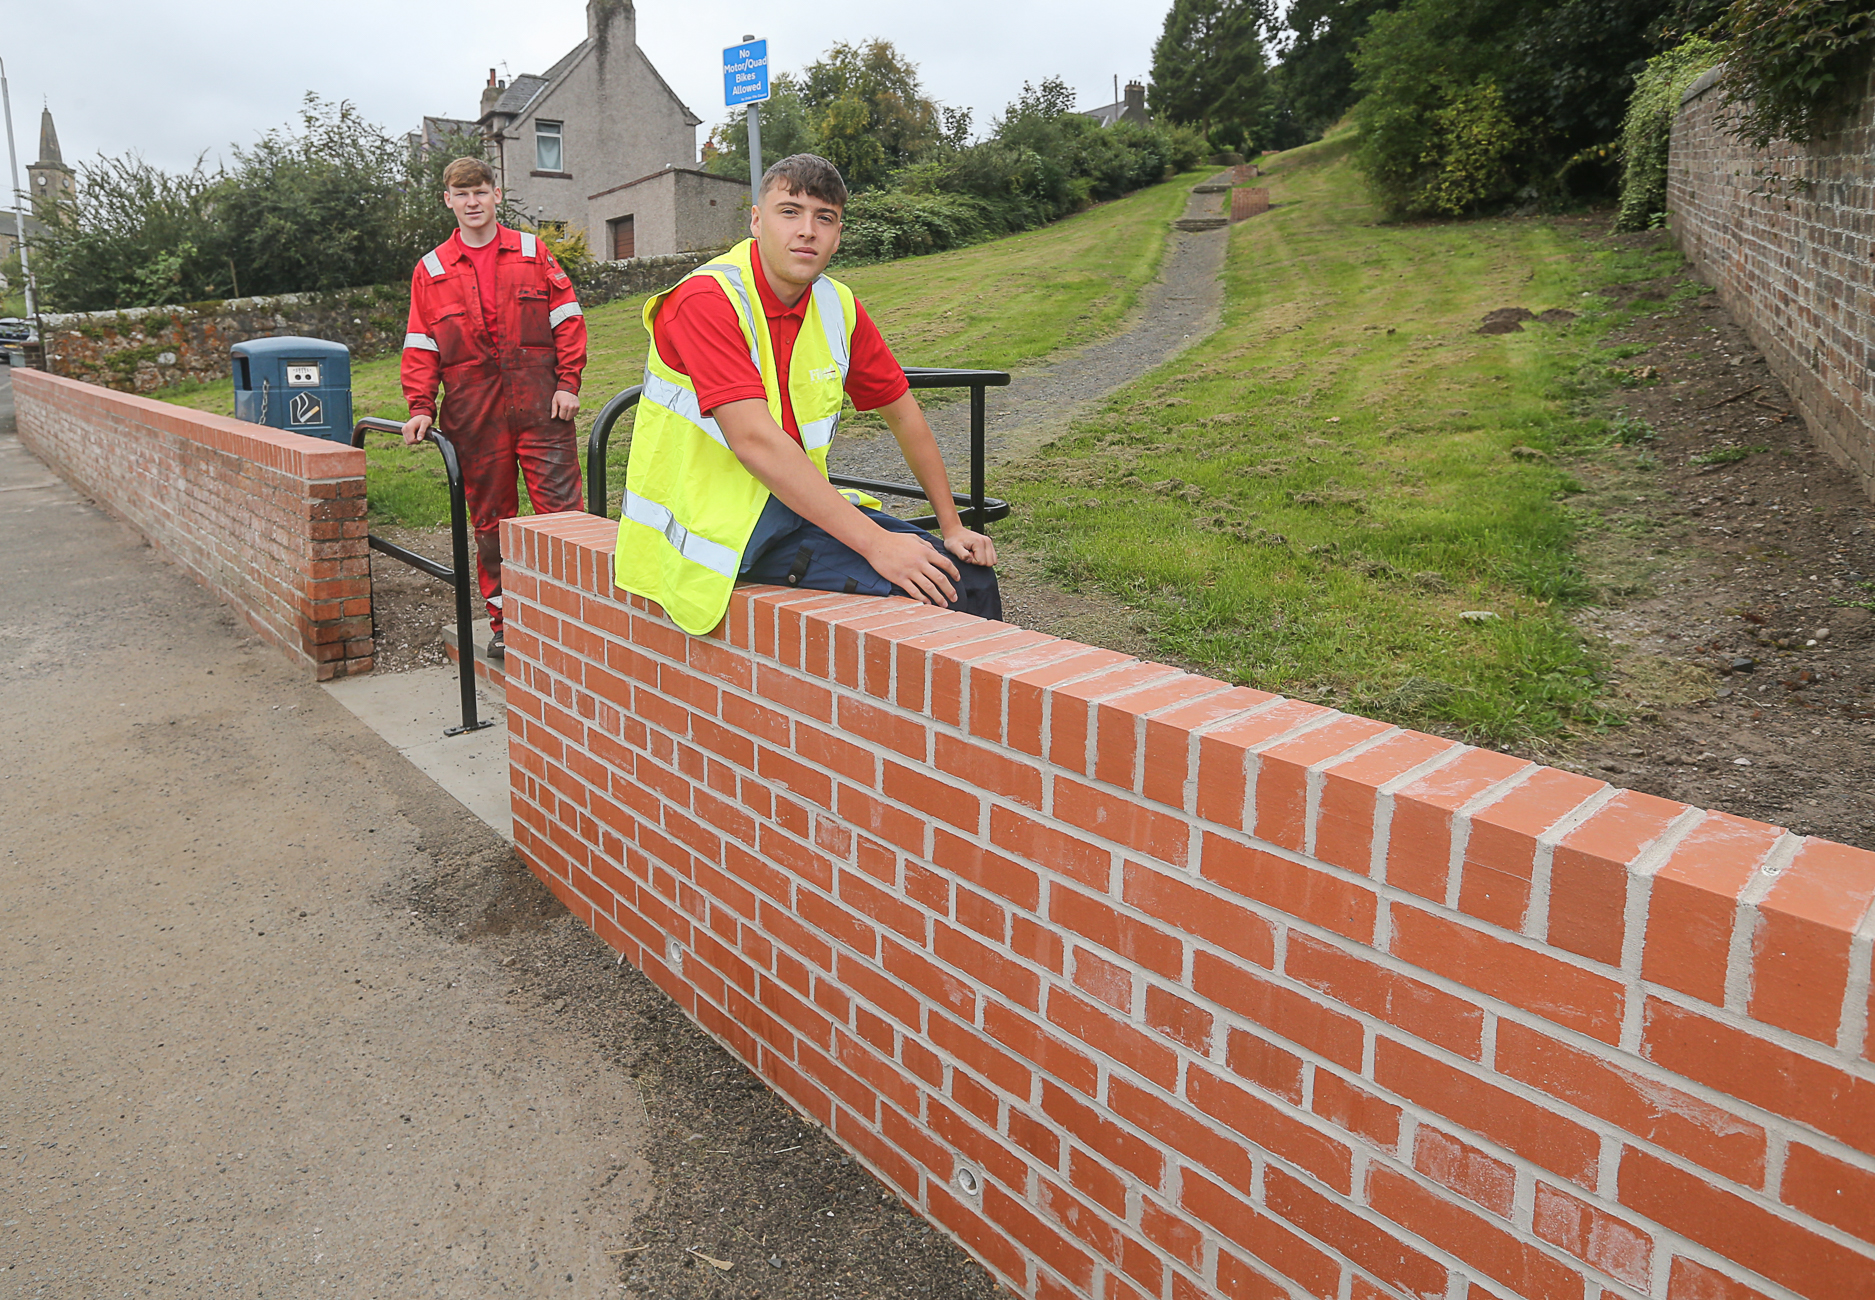 Fife Council apprentices seize opportunity to complete re-build of community eyesore